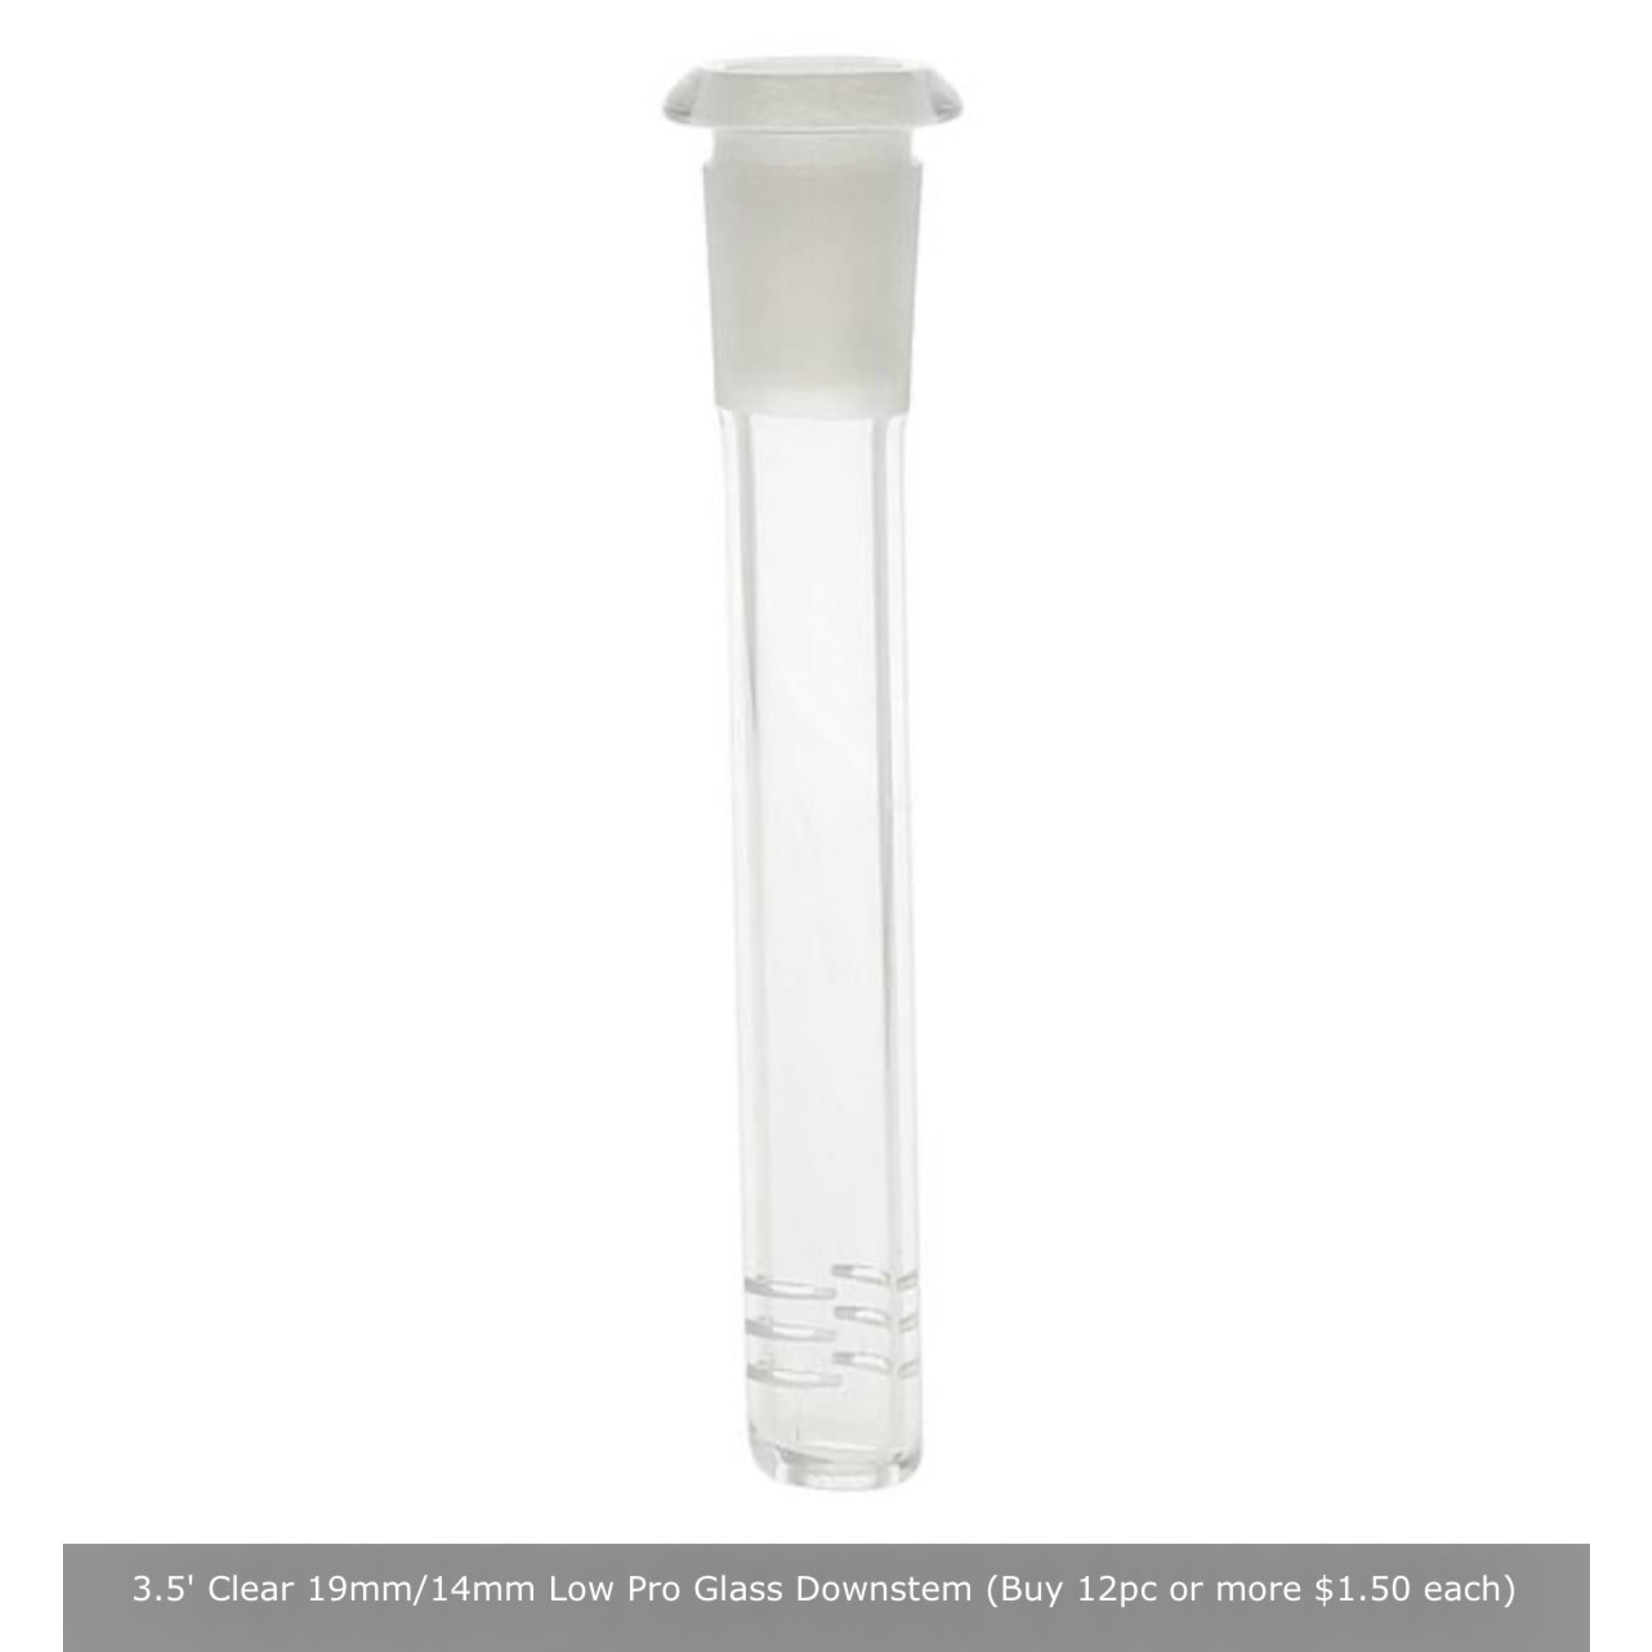 3.5" Clear 19mm/14mm Low Pro Glass Downstem